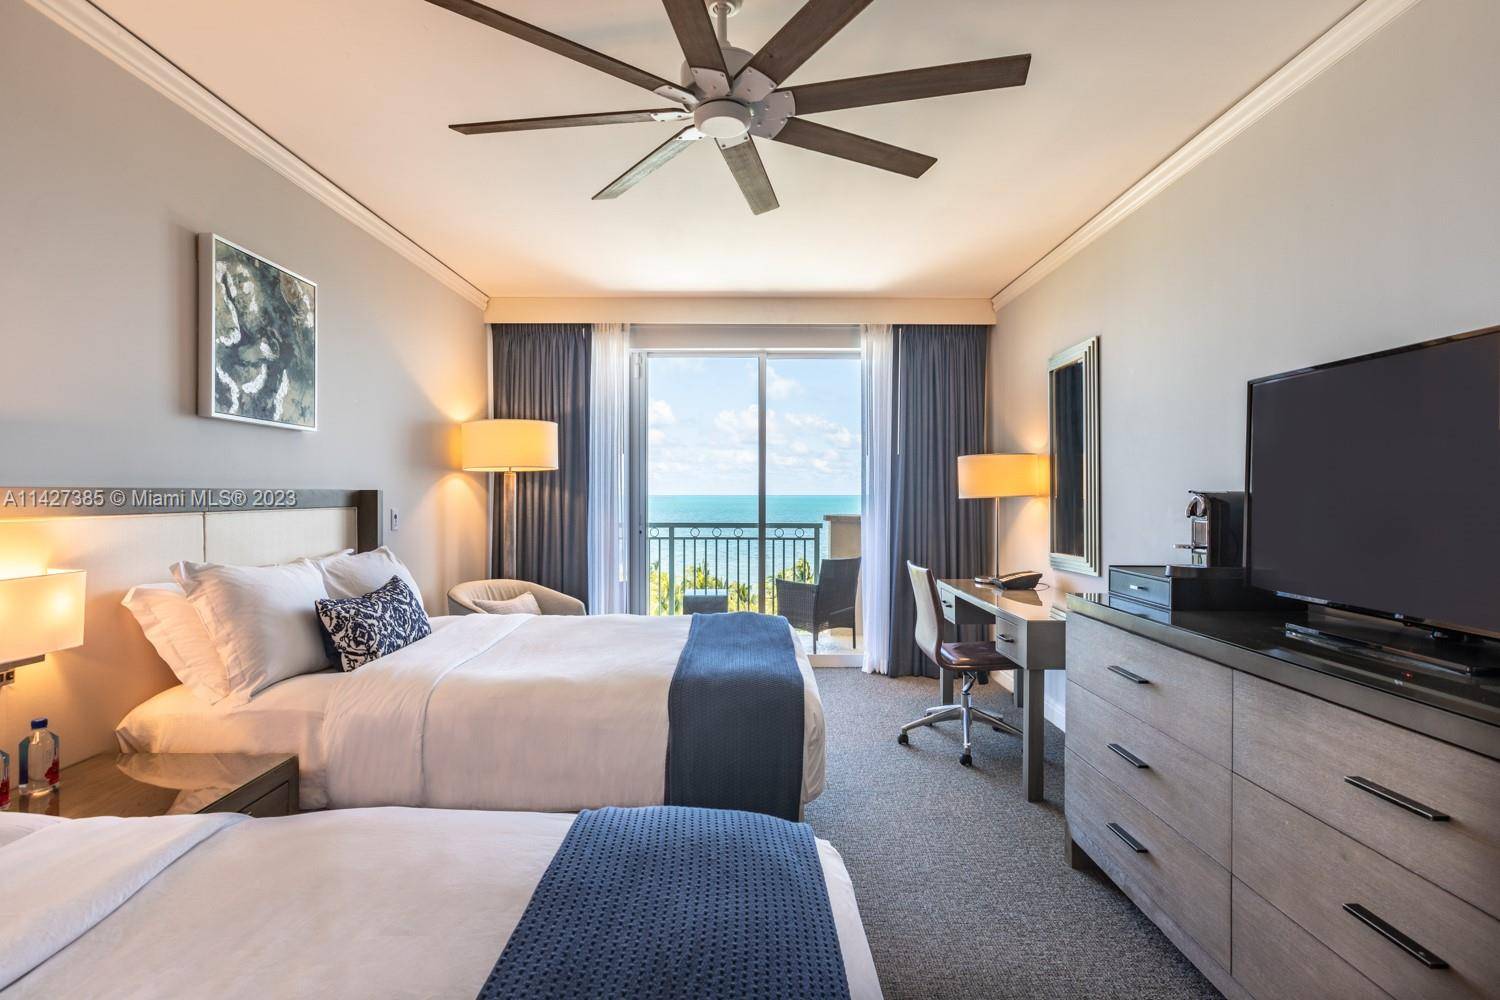 This is an incredible vacation rental to stay at the Ritz Carlton in Key Biscayne.